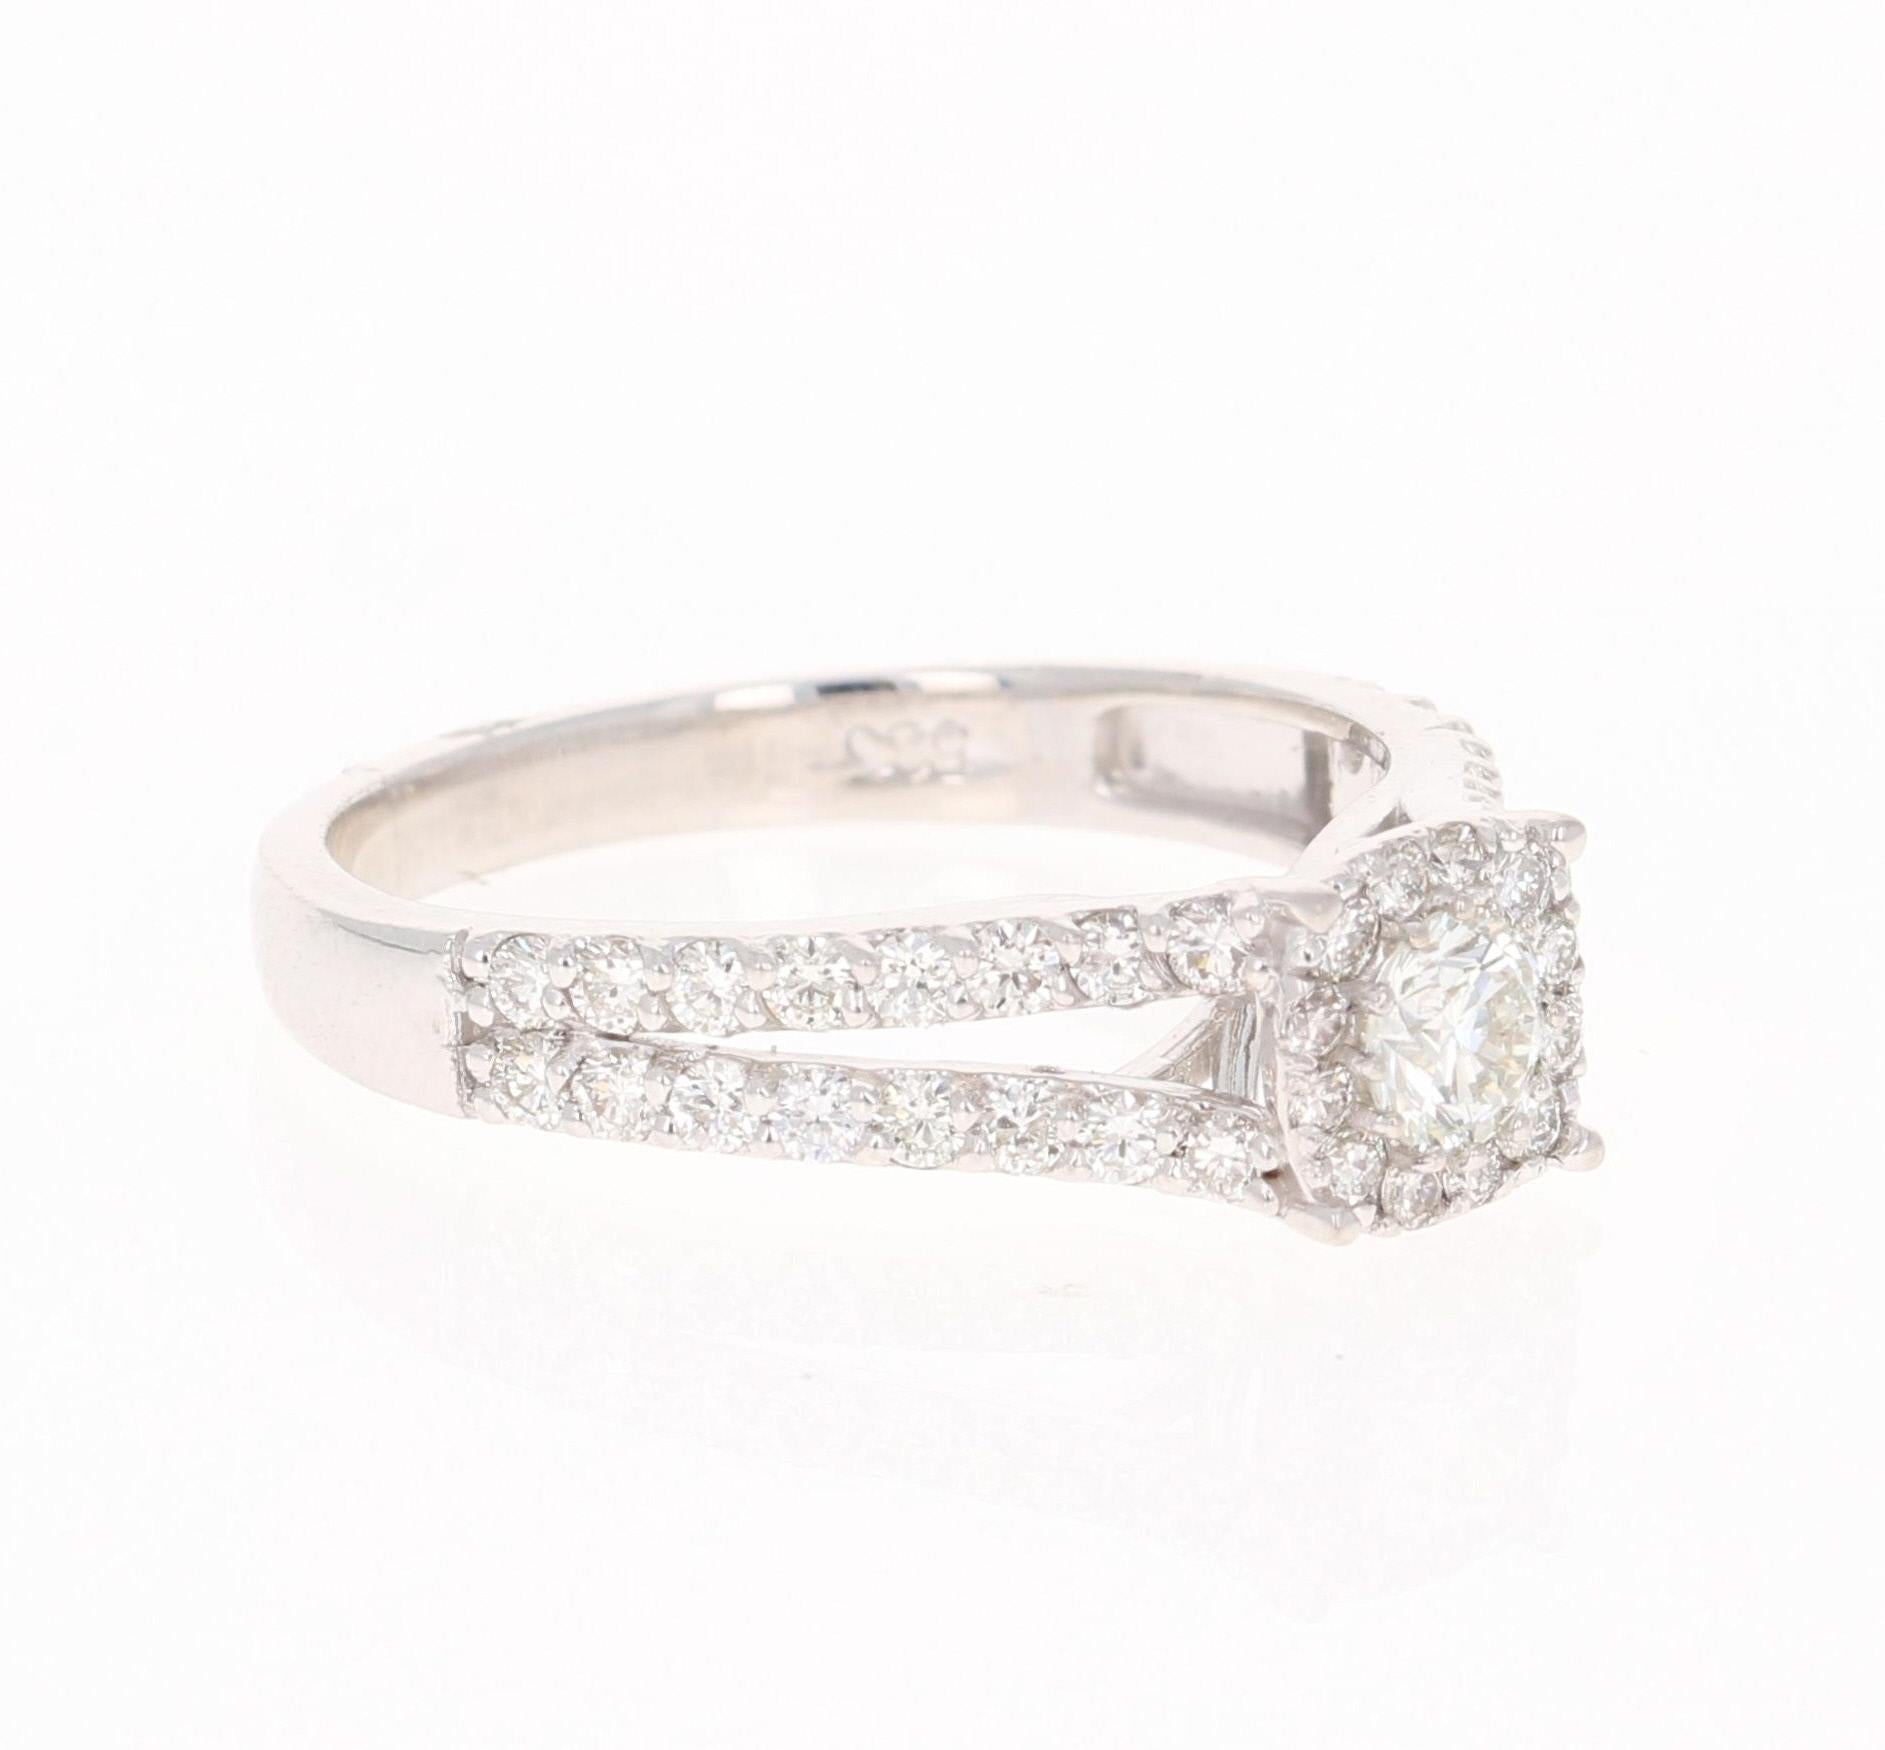 This unique Cluster ring has 45 Round Cut Diamonds that weigh 0.95 Carats. The Cluster setting makes the center Diamond look well over a carat. The cluster at top is approximately 6.5 mm. The Clarity is VS2 and the Color is H.

It is beautifully set